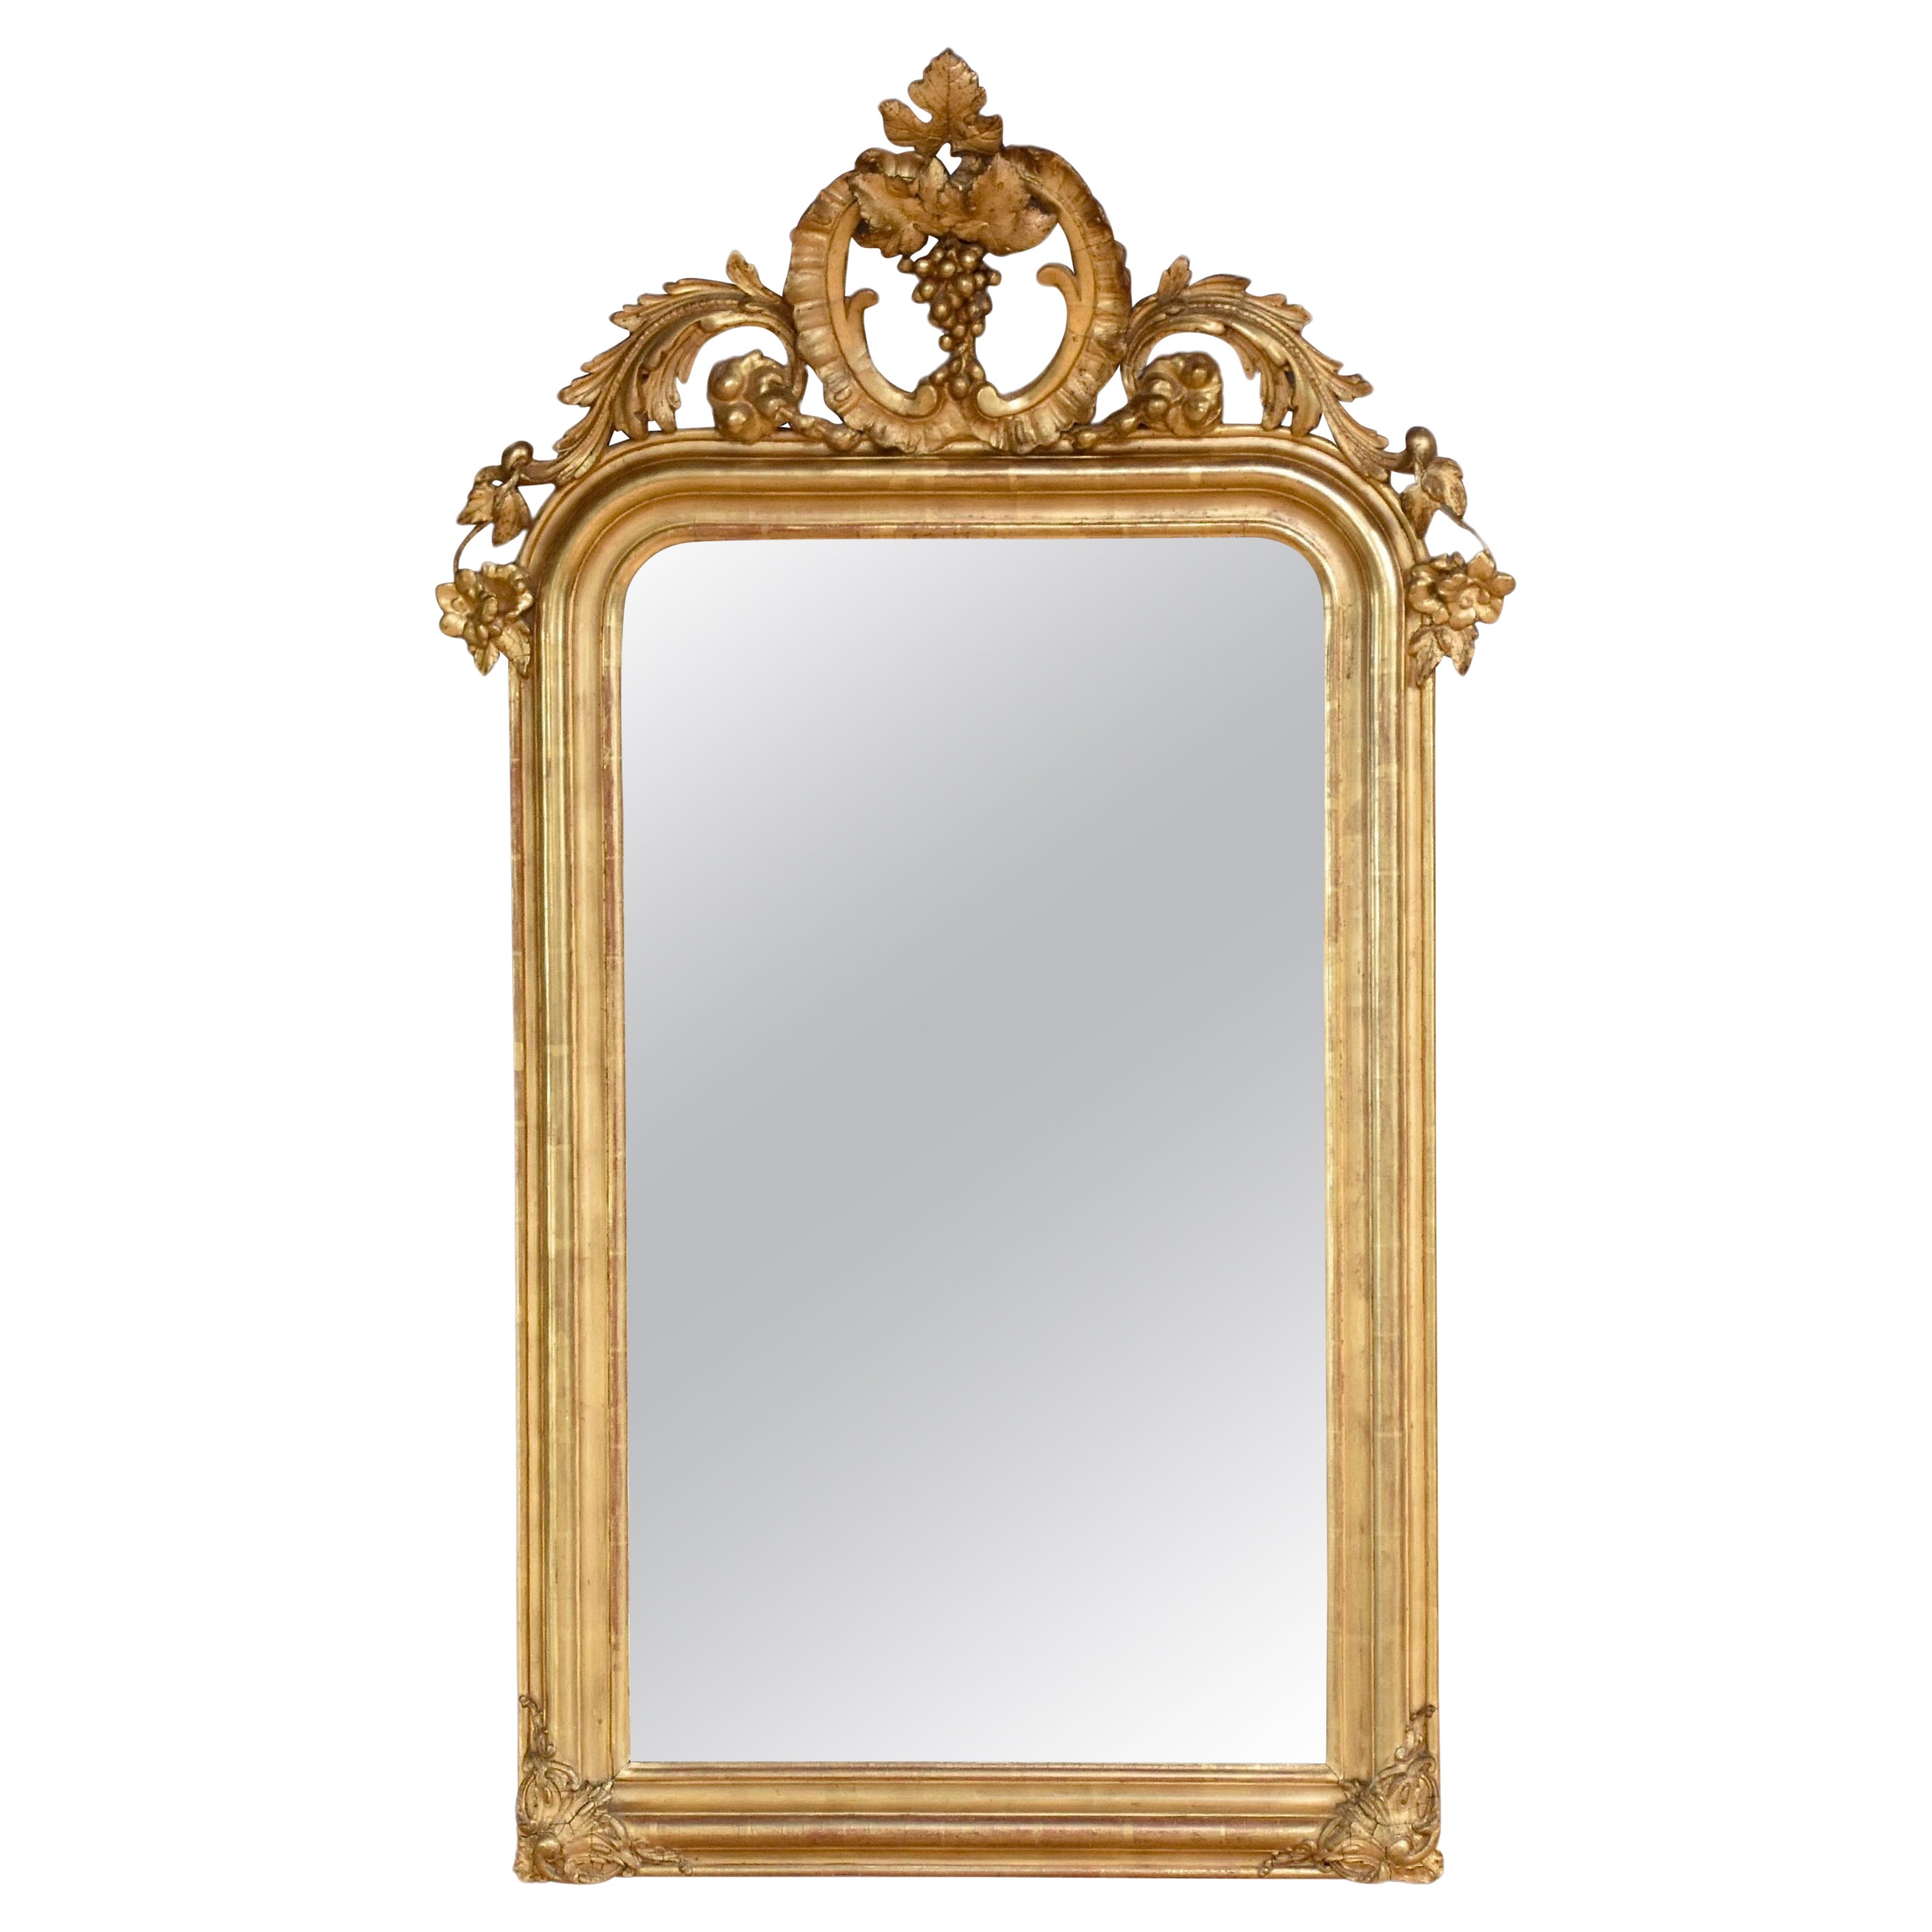 19th century gold leaf gilt French mirror Louis Philippe with a crest